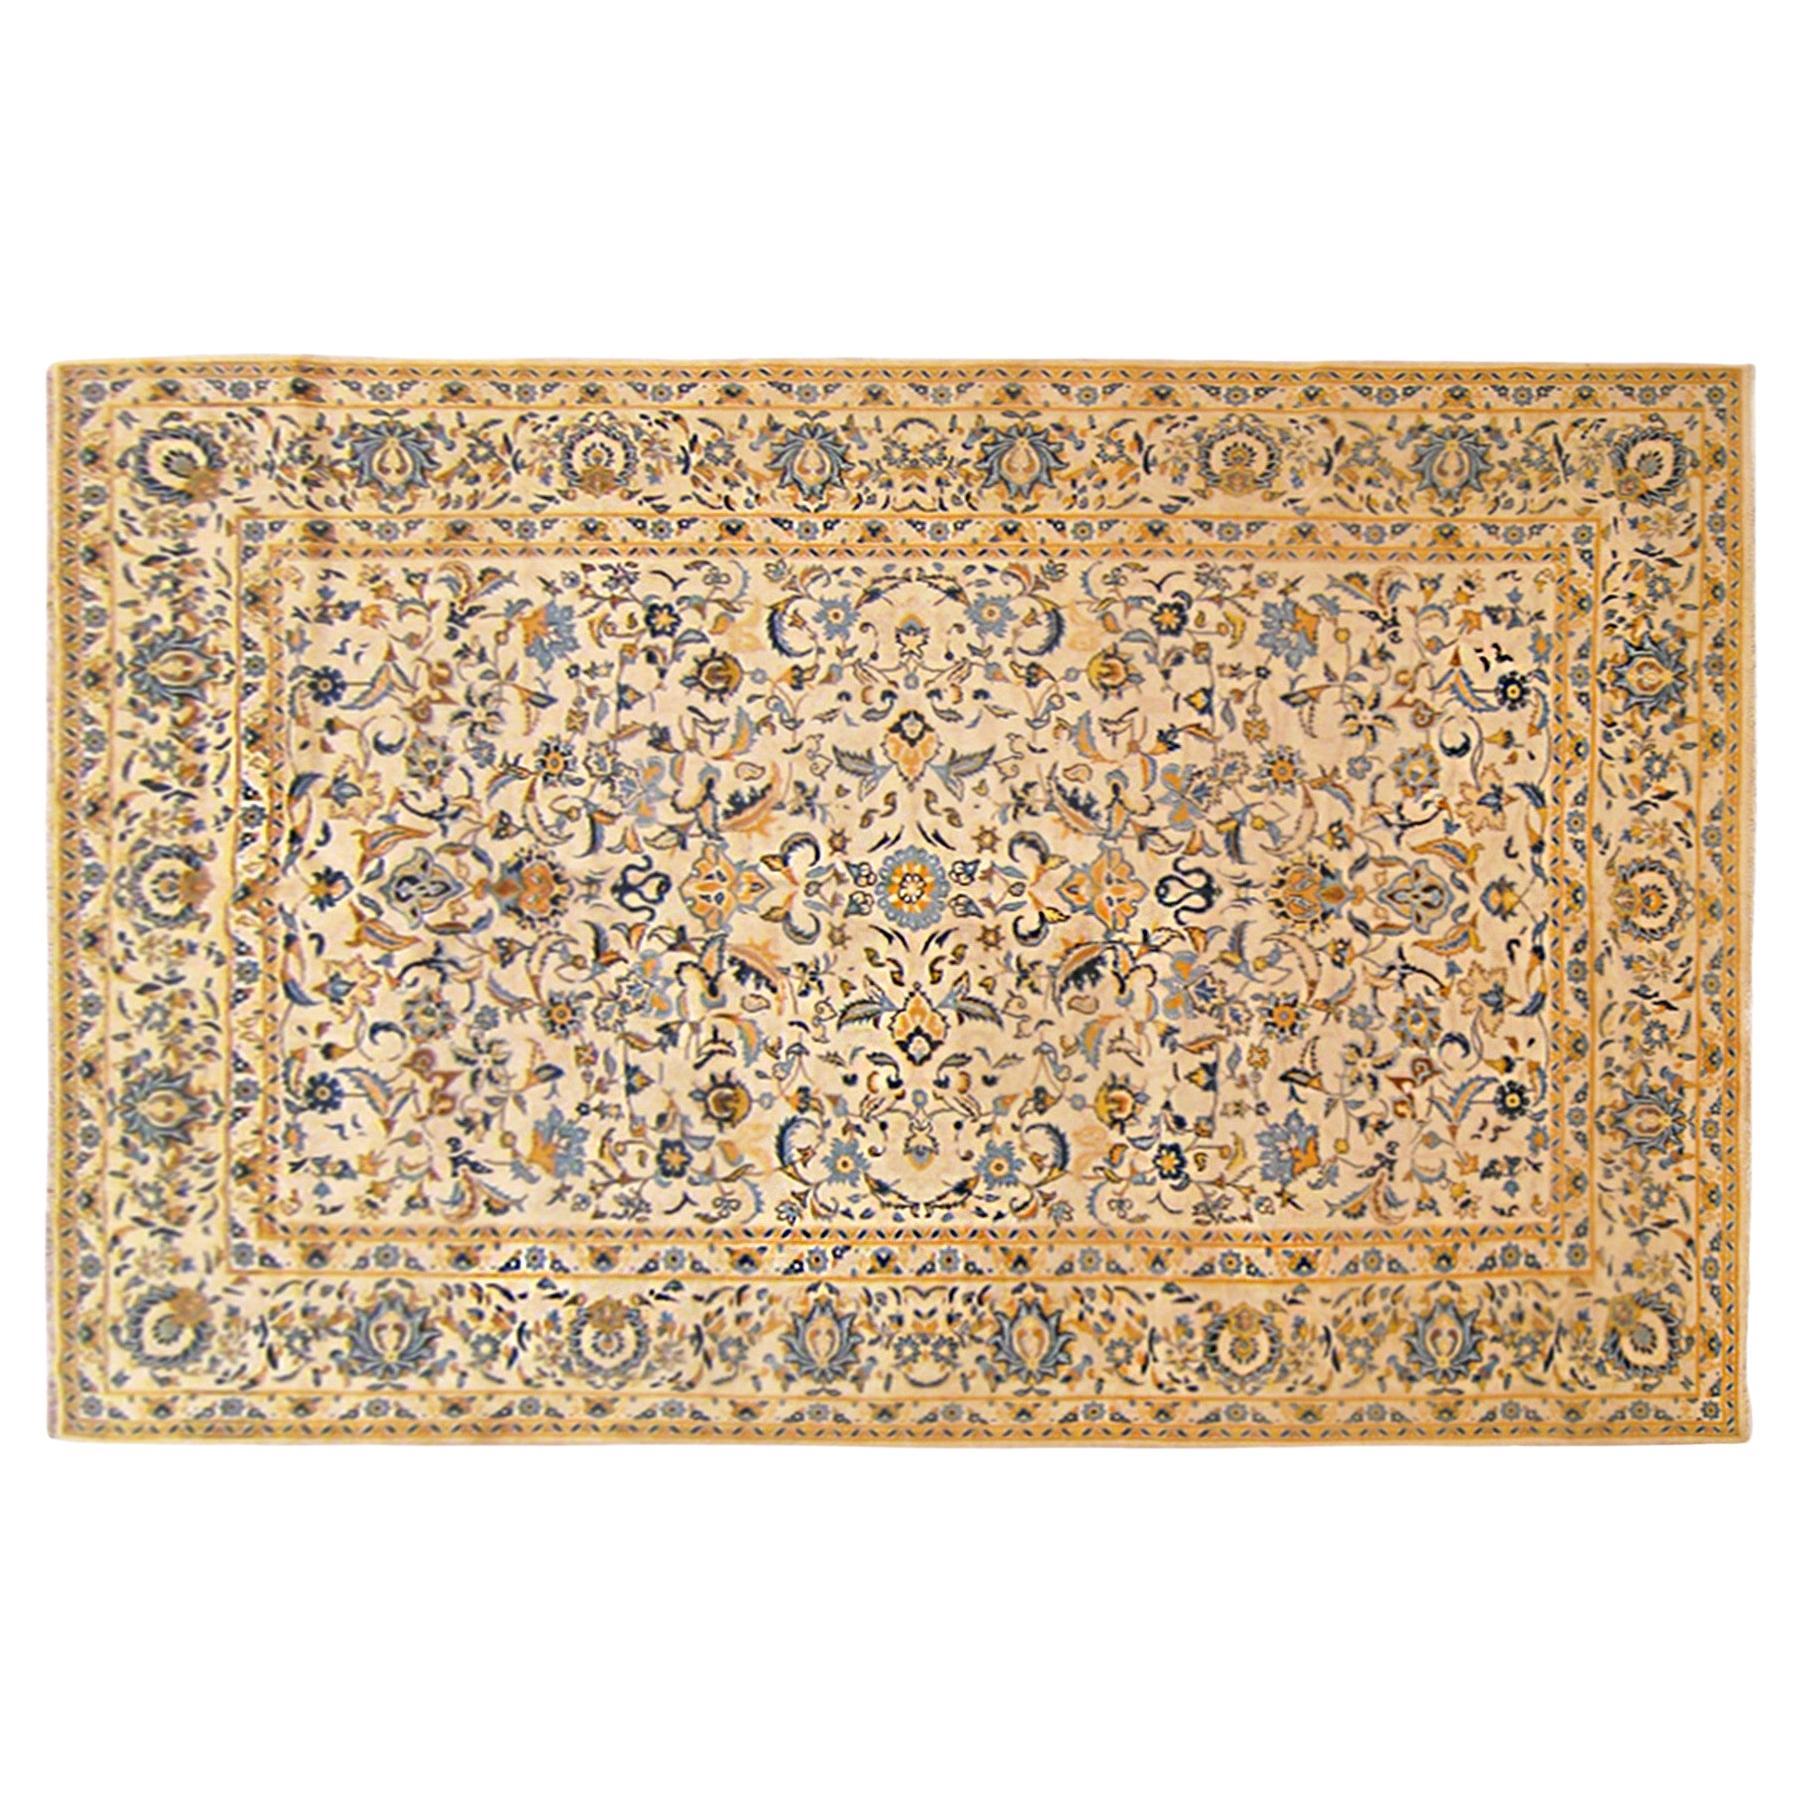 Vintage Persian Kashan Oriental Carpet, in Room size, with Floral Elements 